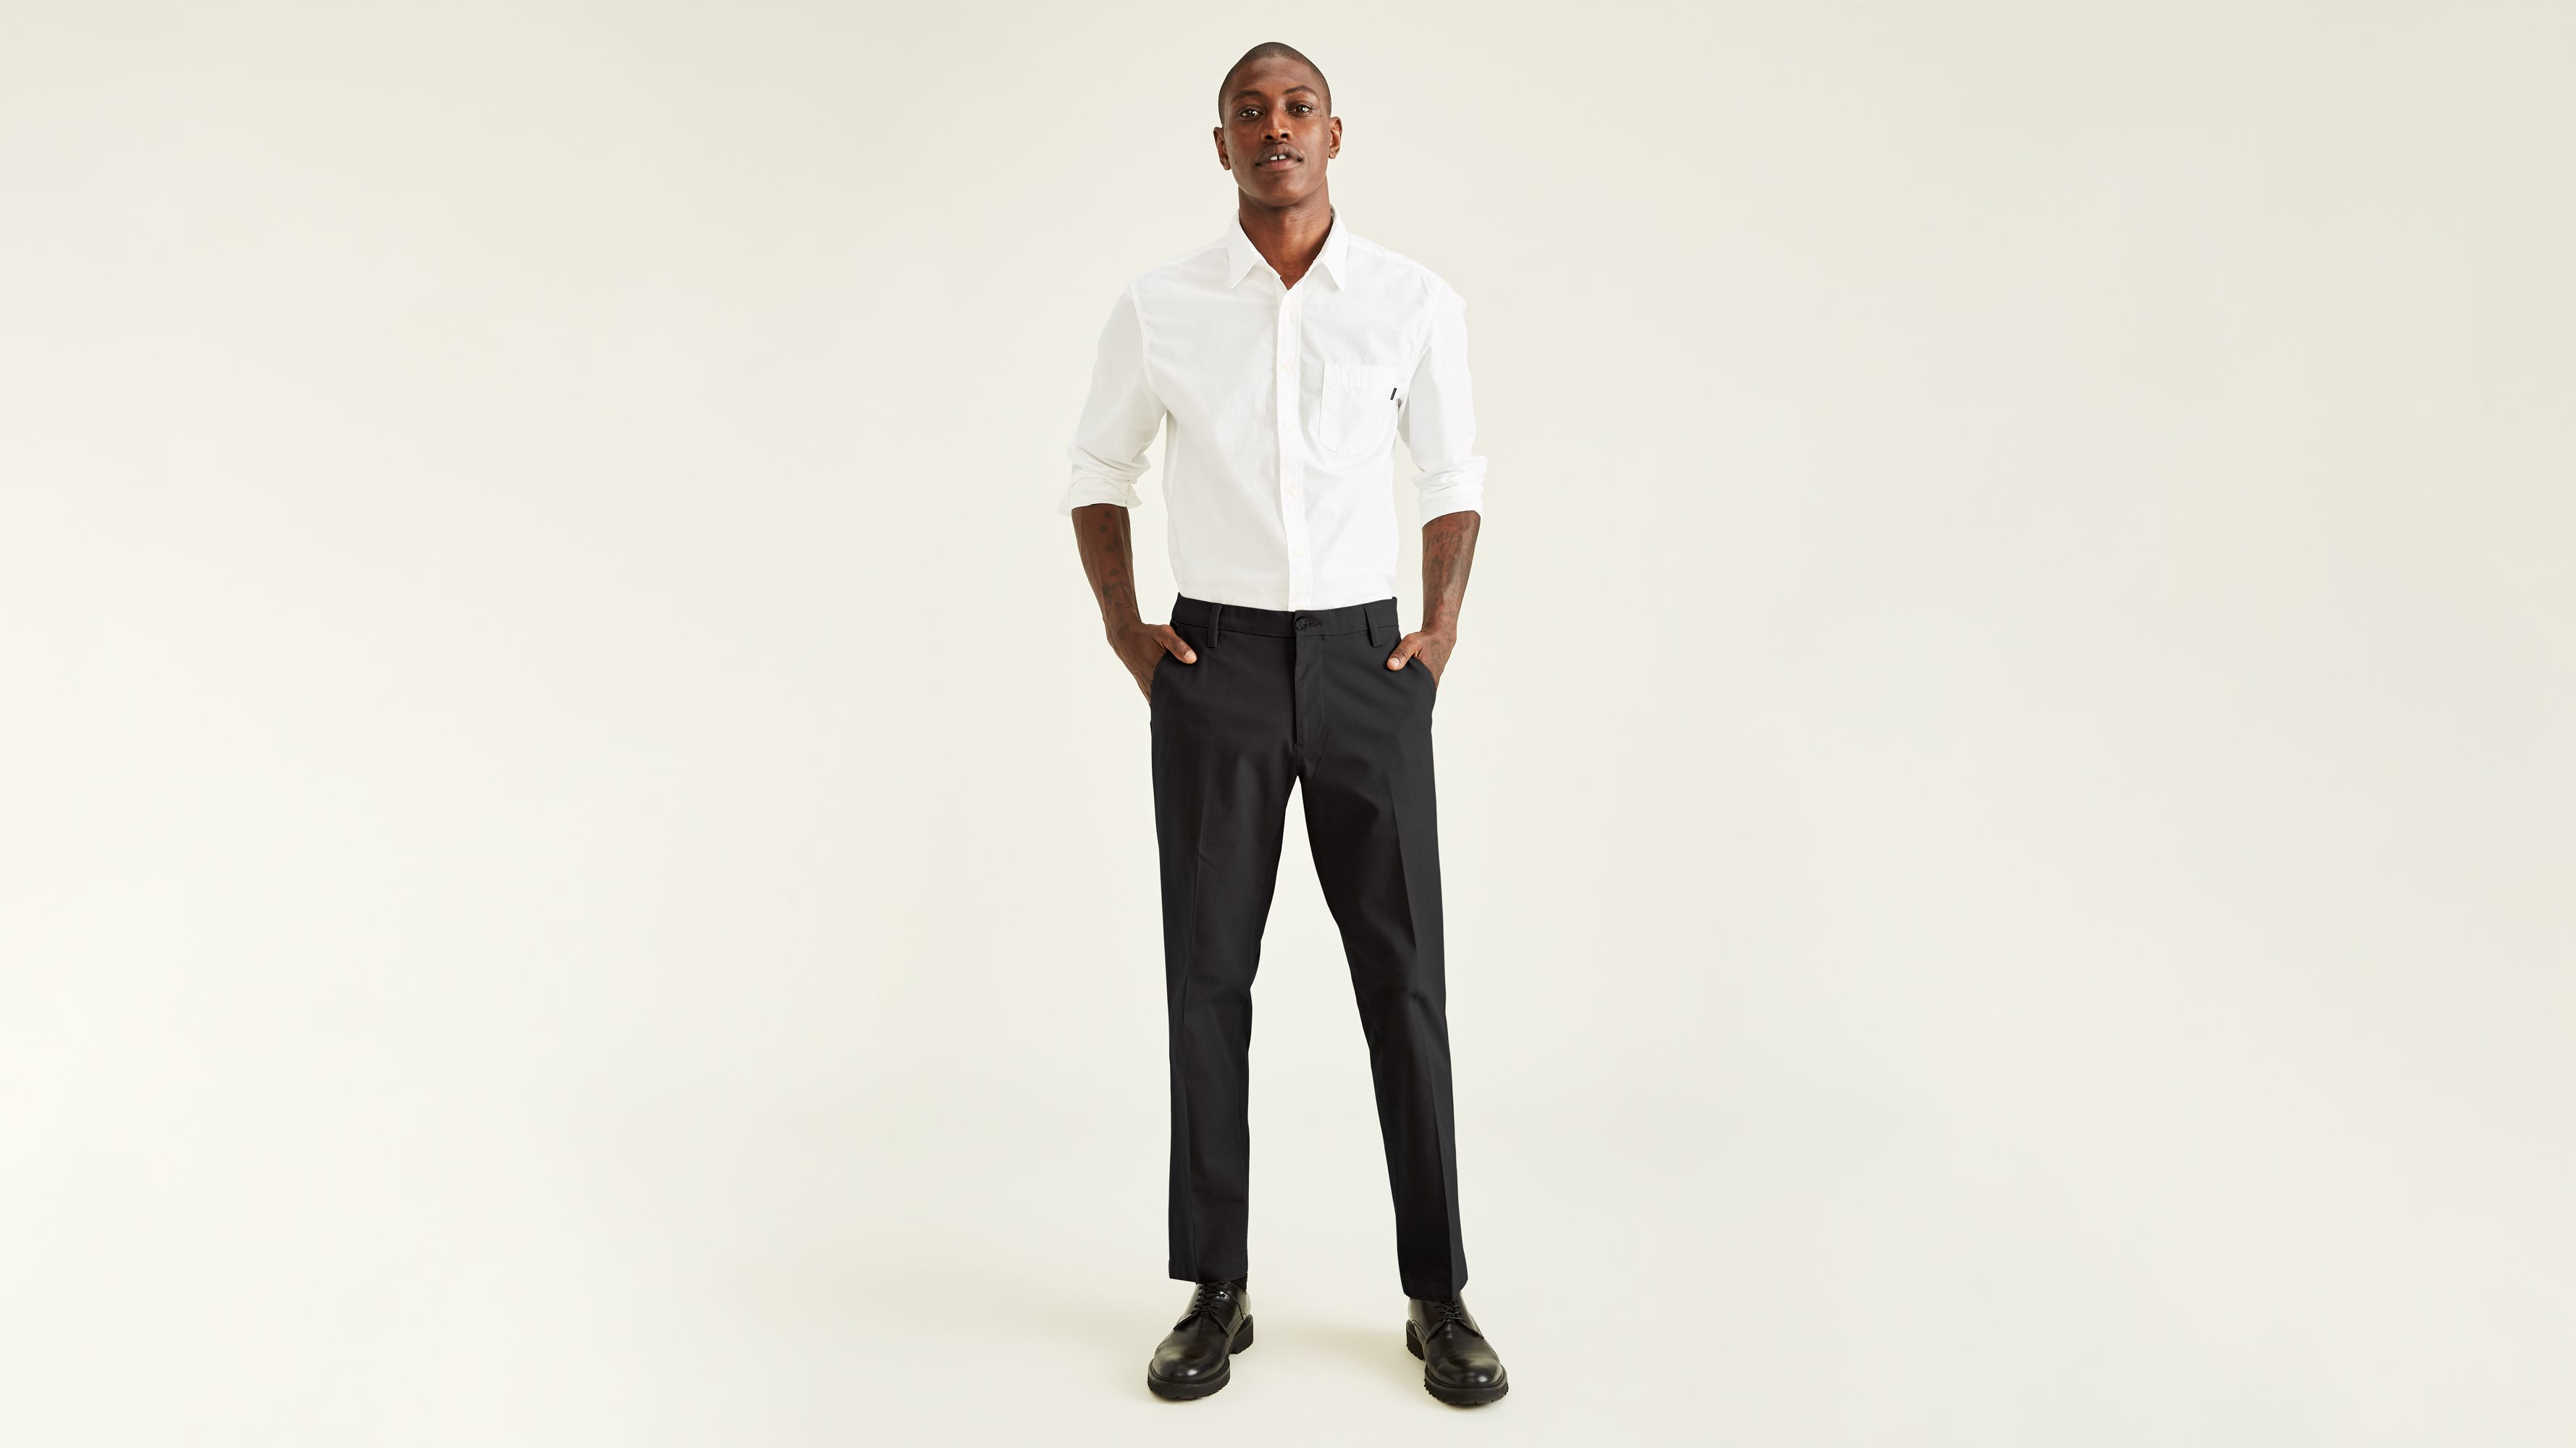 Workday Khakis, Straight Fit – Dockers®